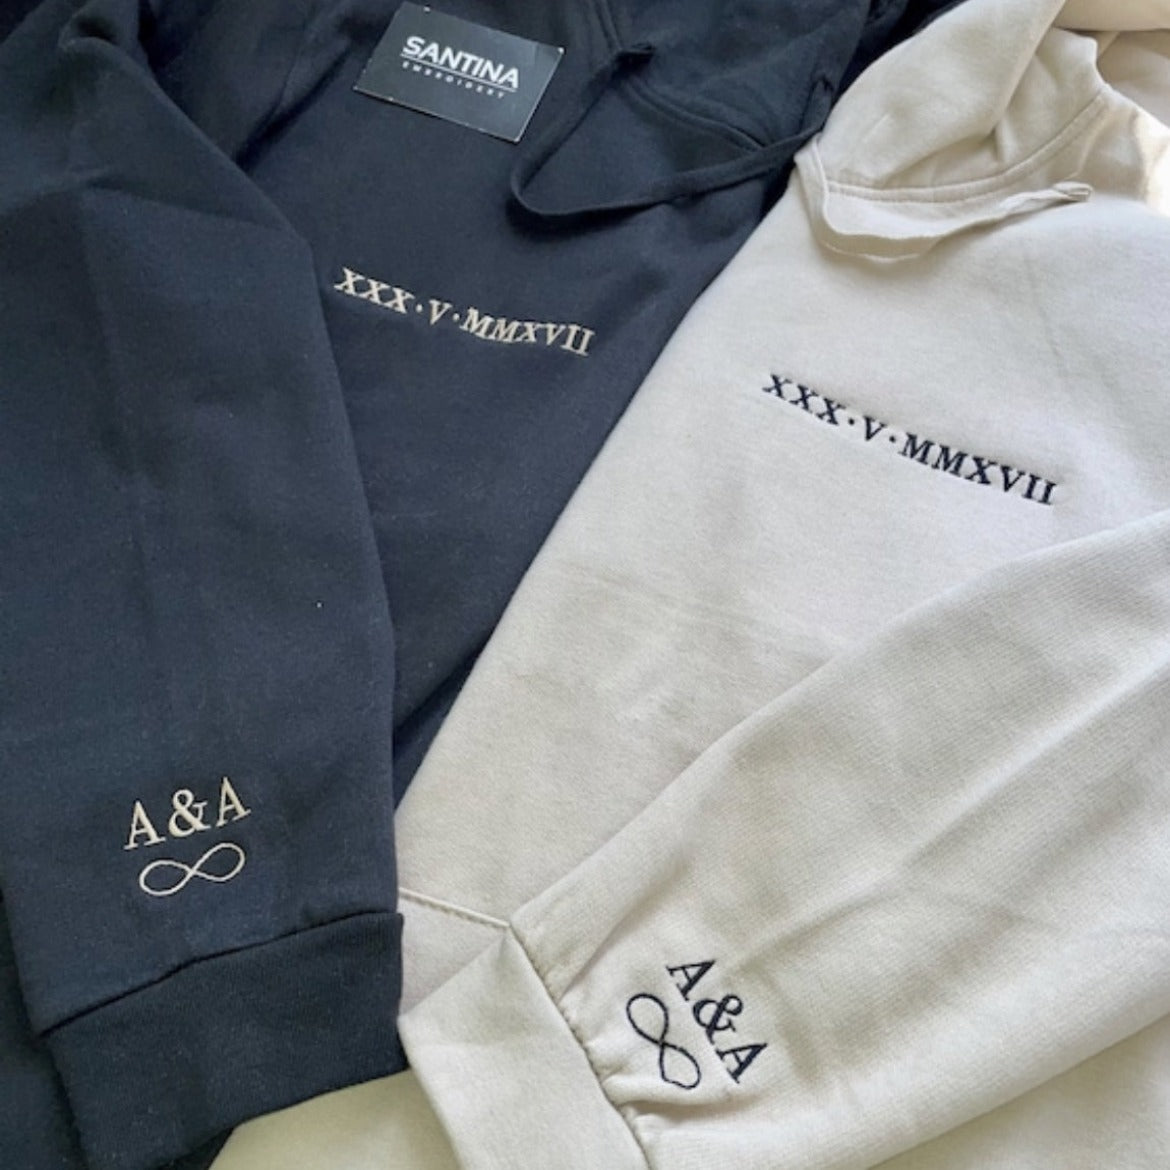 Custom Embroidered Hoodies with Roman Numerals, Santina Embroidery